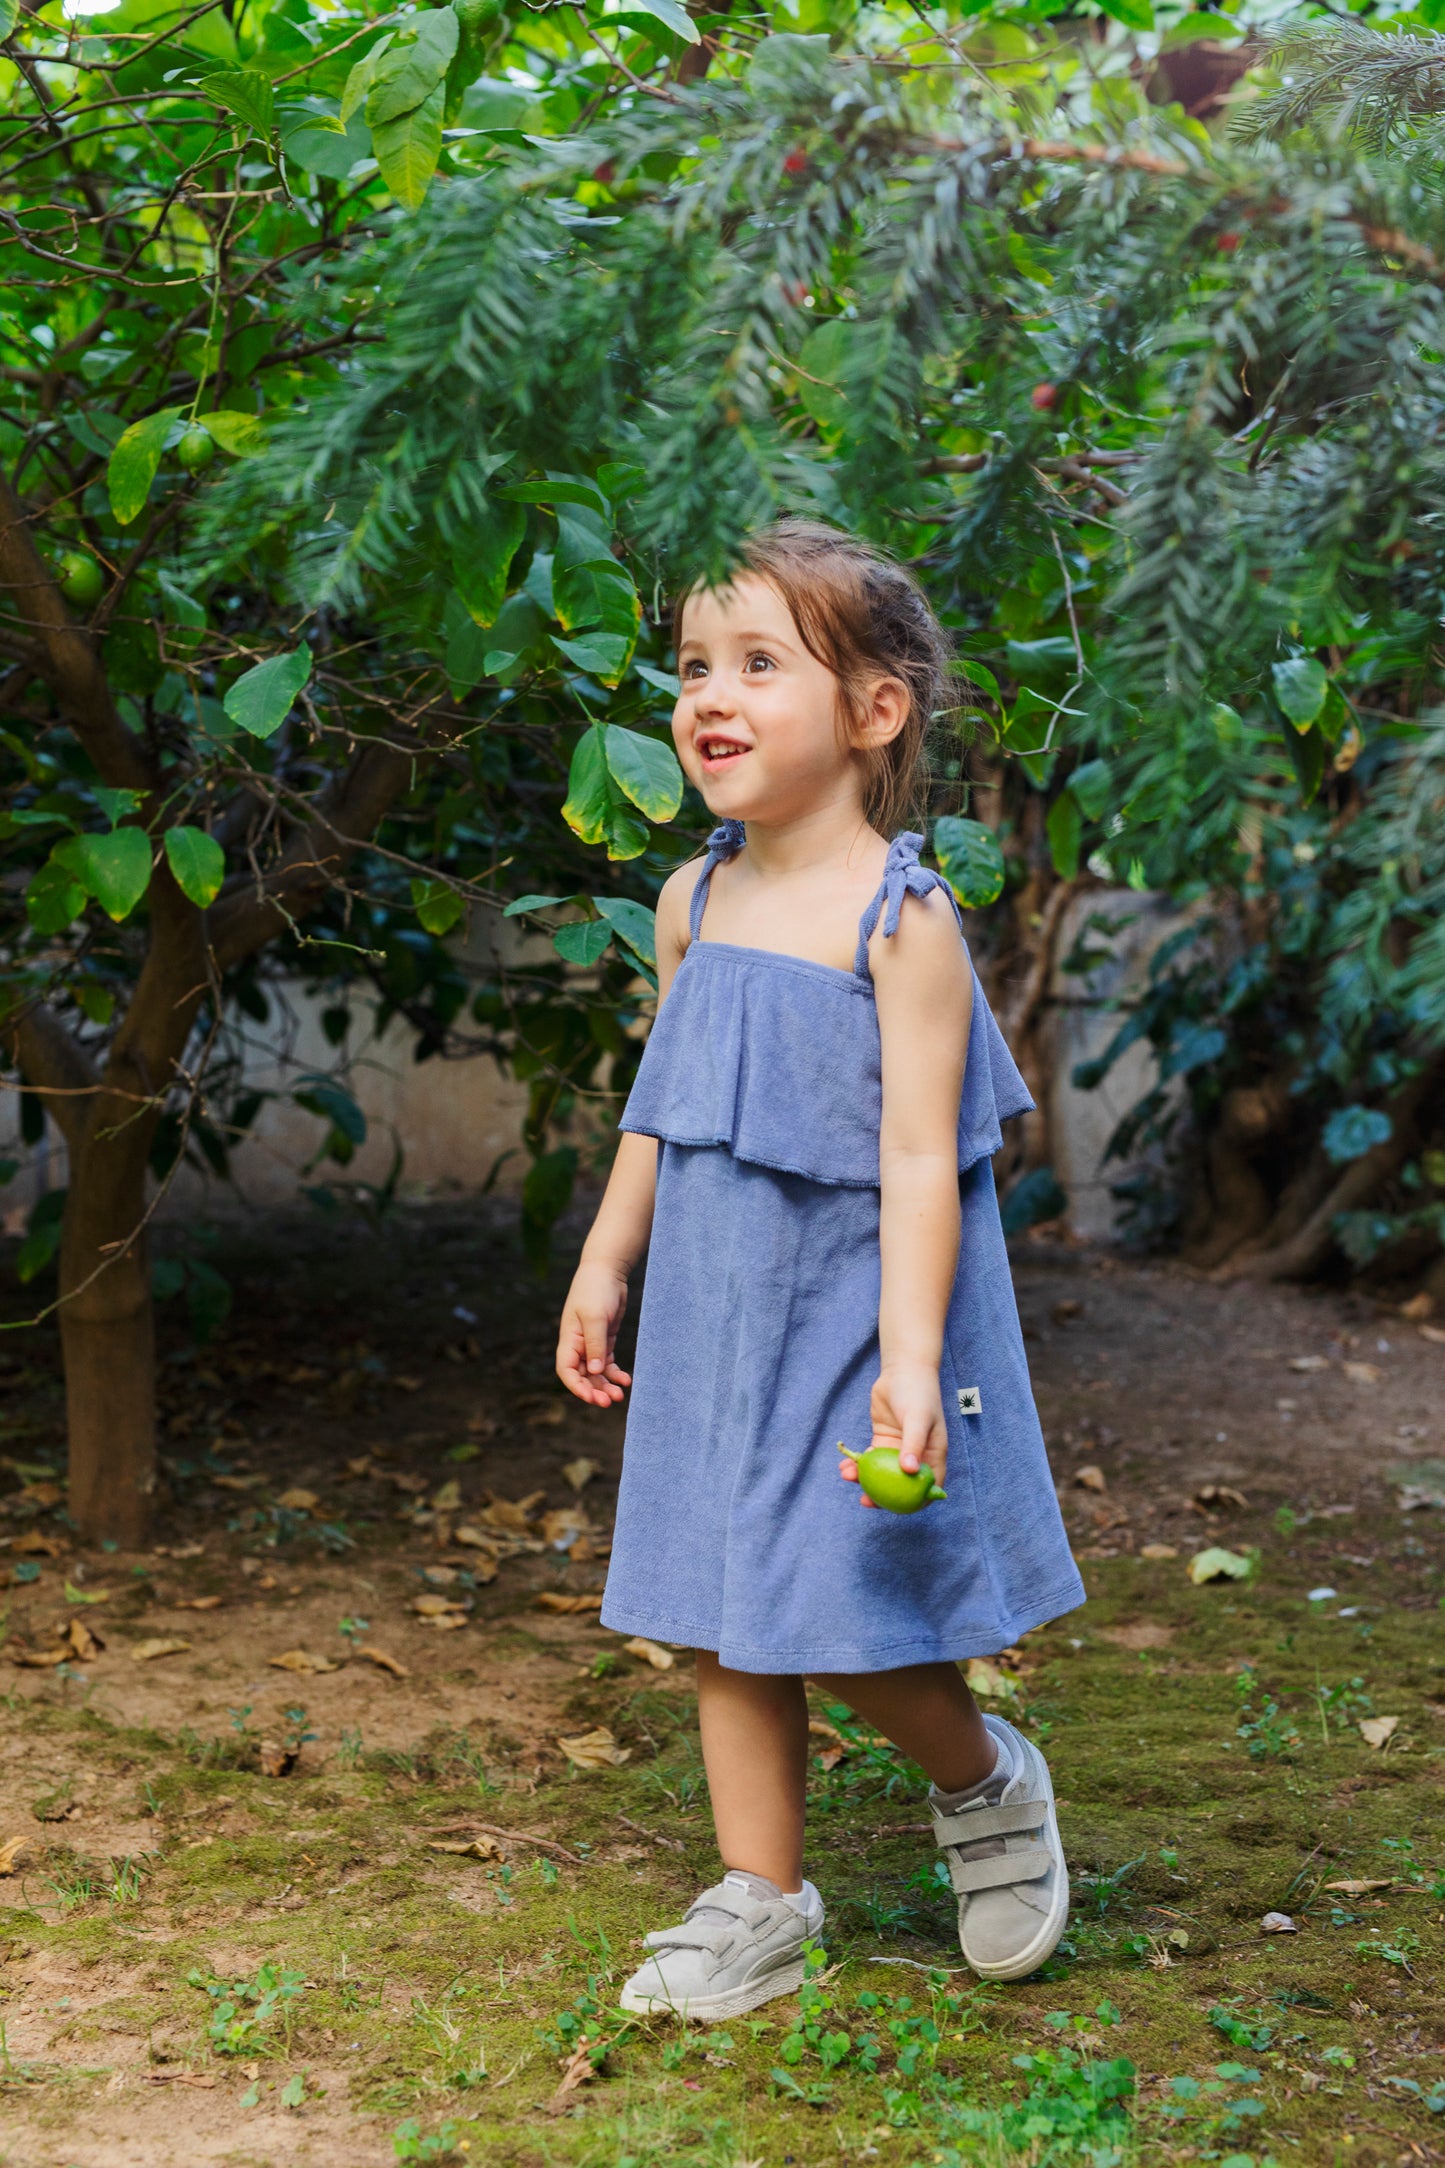 "Sun" Terry Towel Dress - Aged 18m to 3 Yrs